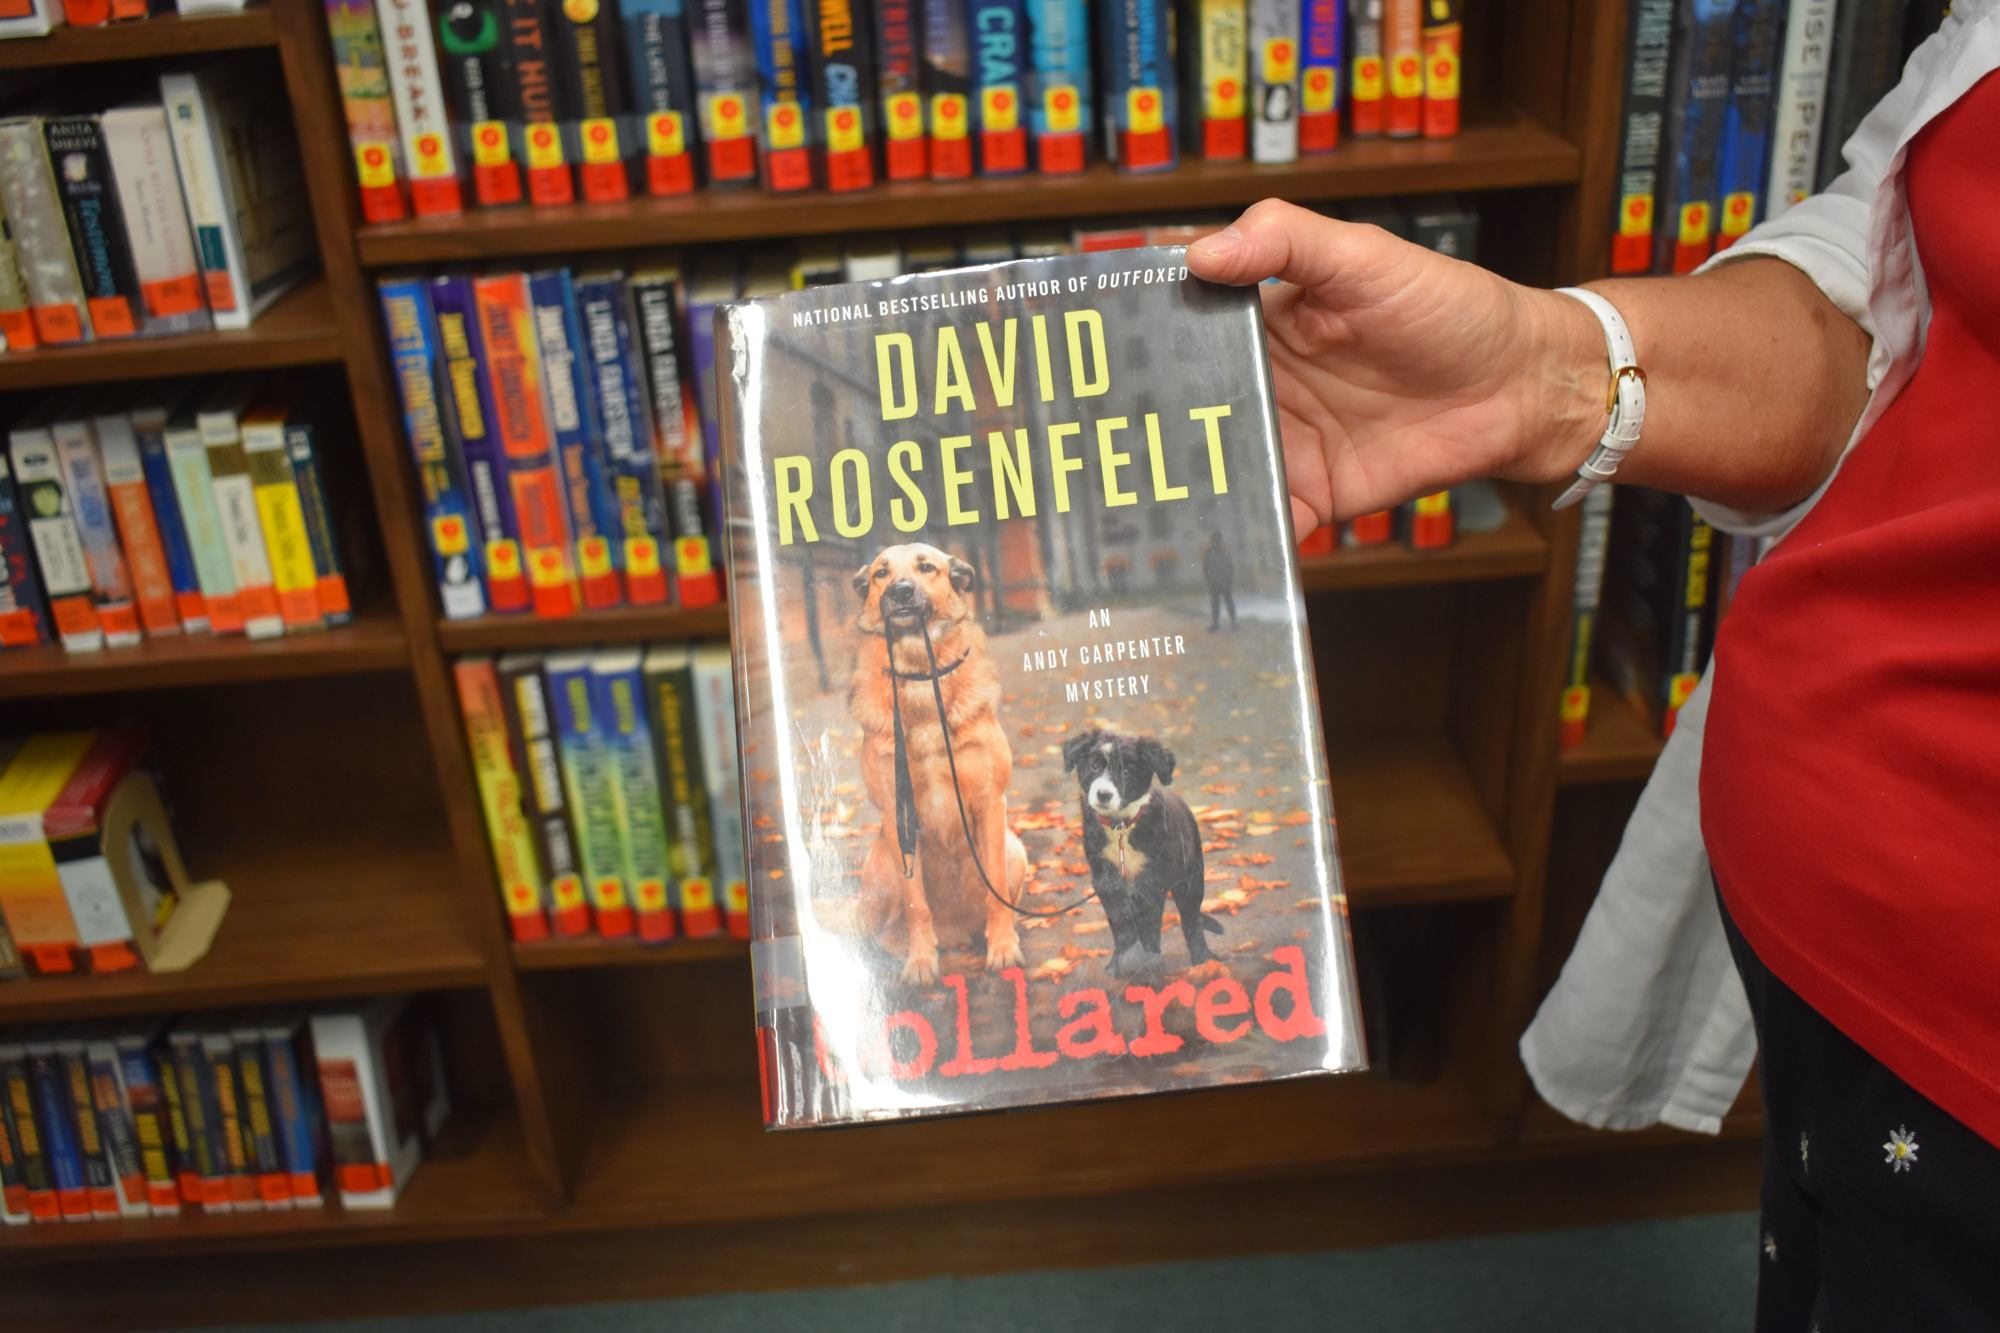 Connie Hilwig recommends David Rosenfelt murder mysteries.